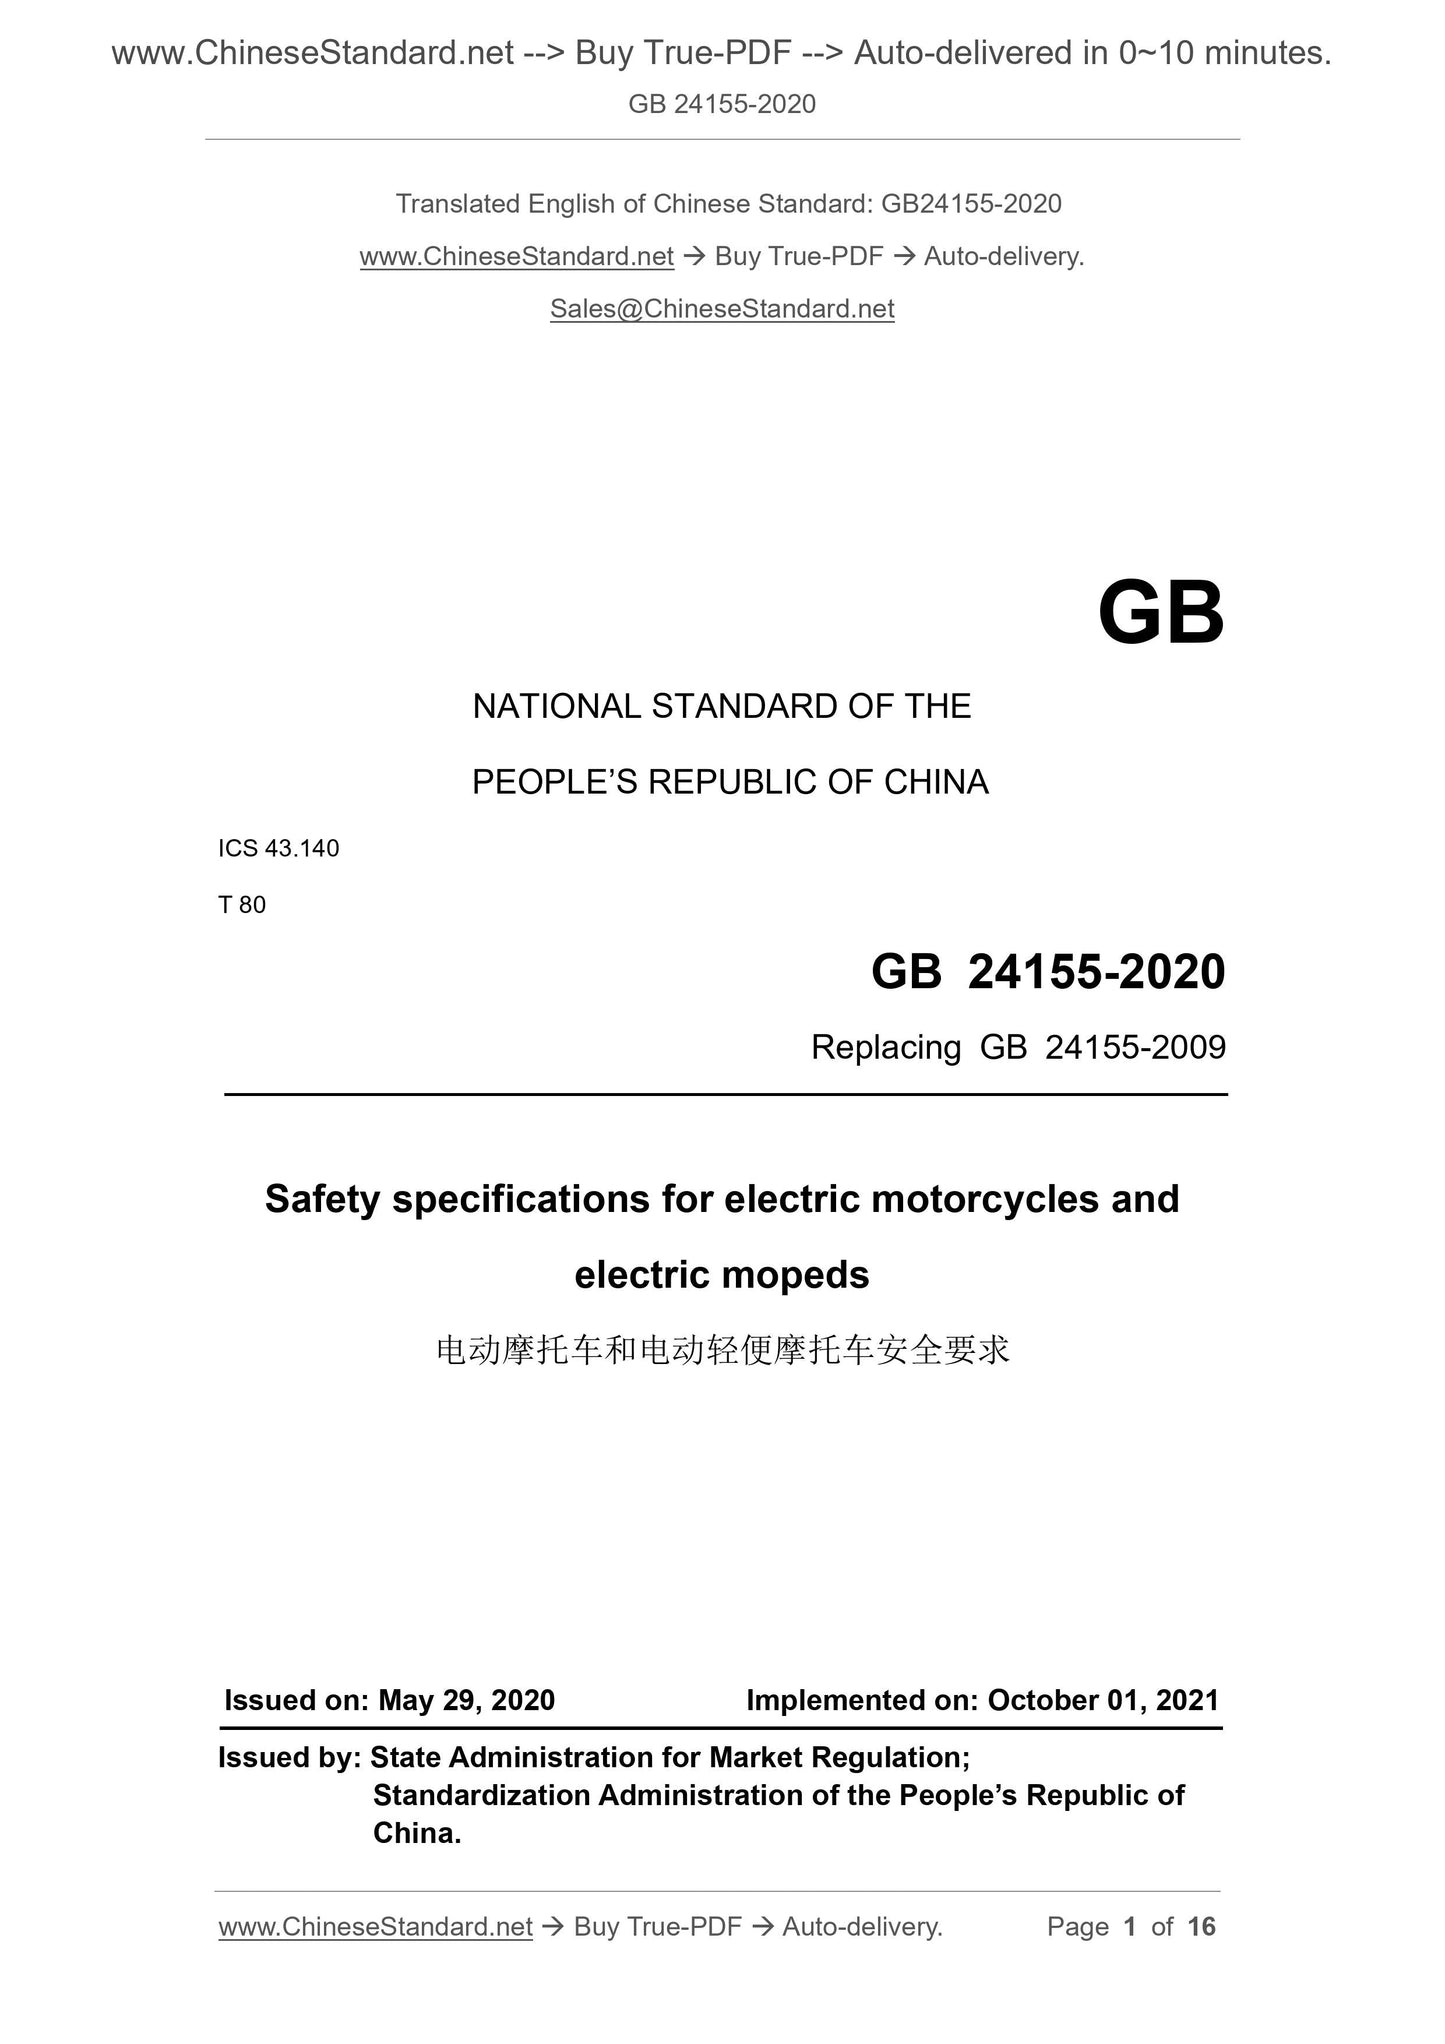 GB 24155-2020 Page 1